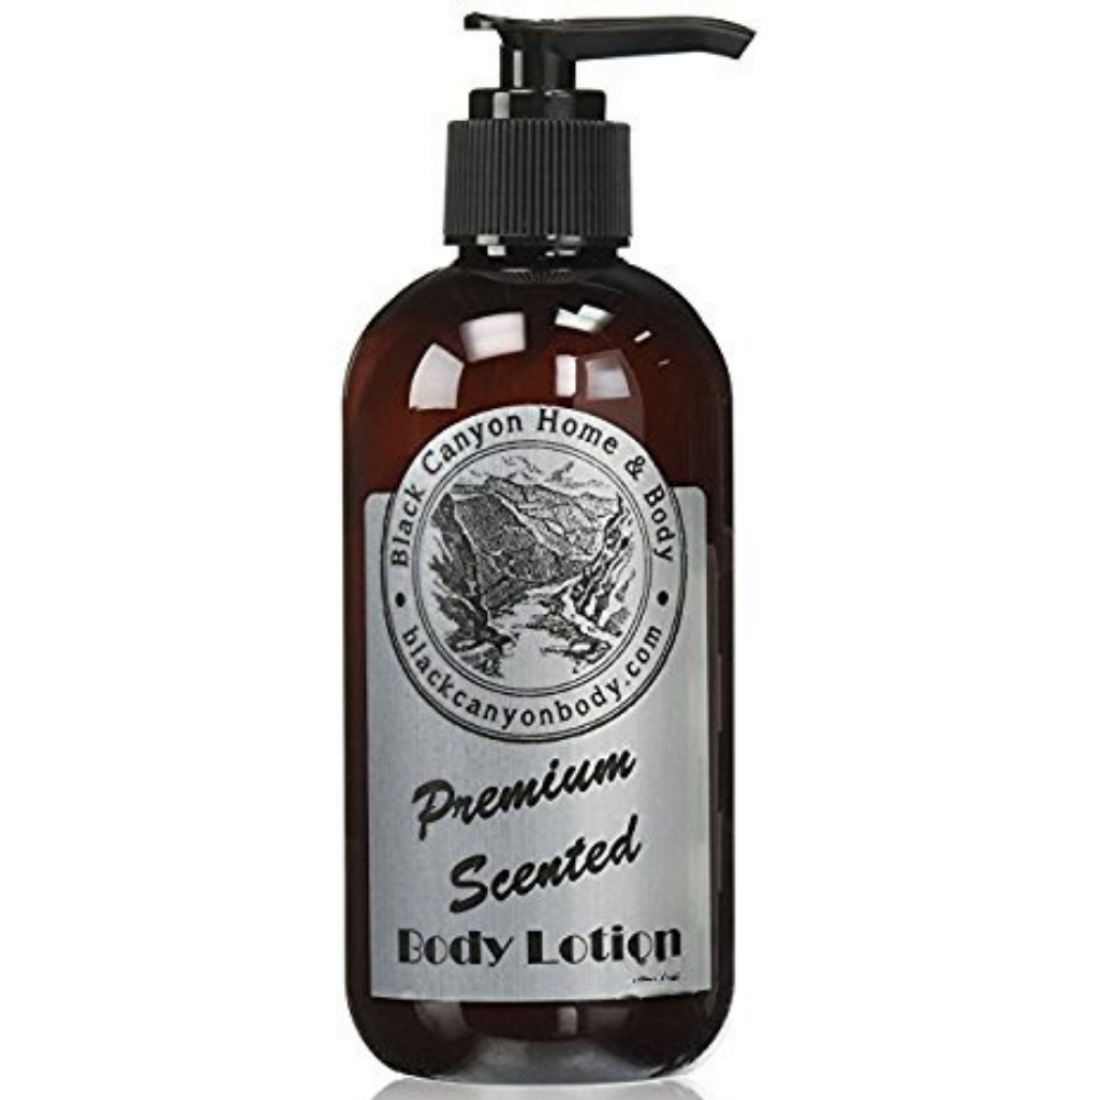 Black Canyon Blackberry Tangerine Scented Luxury Body Lotion with Lanolin and Jojoba Oil